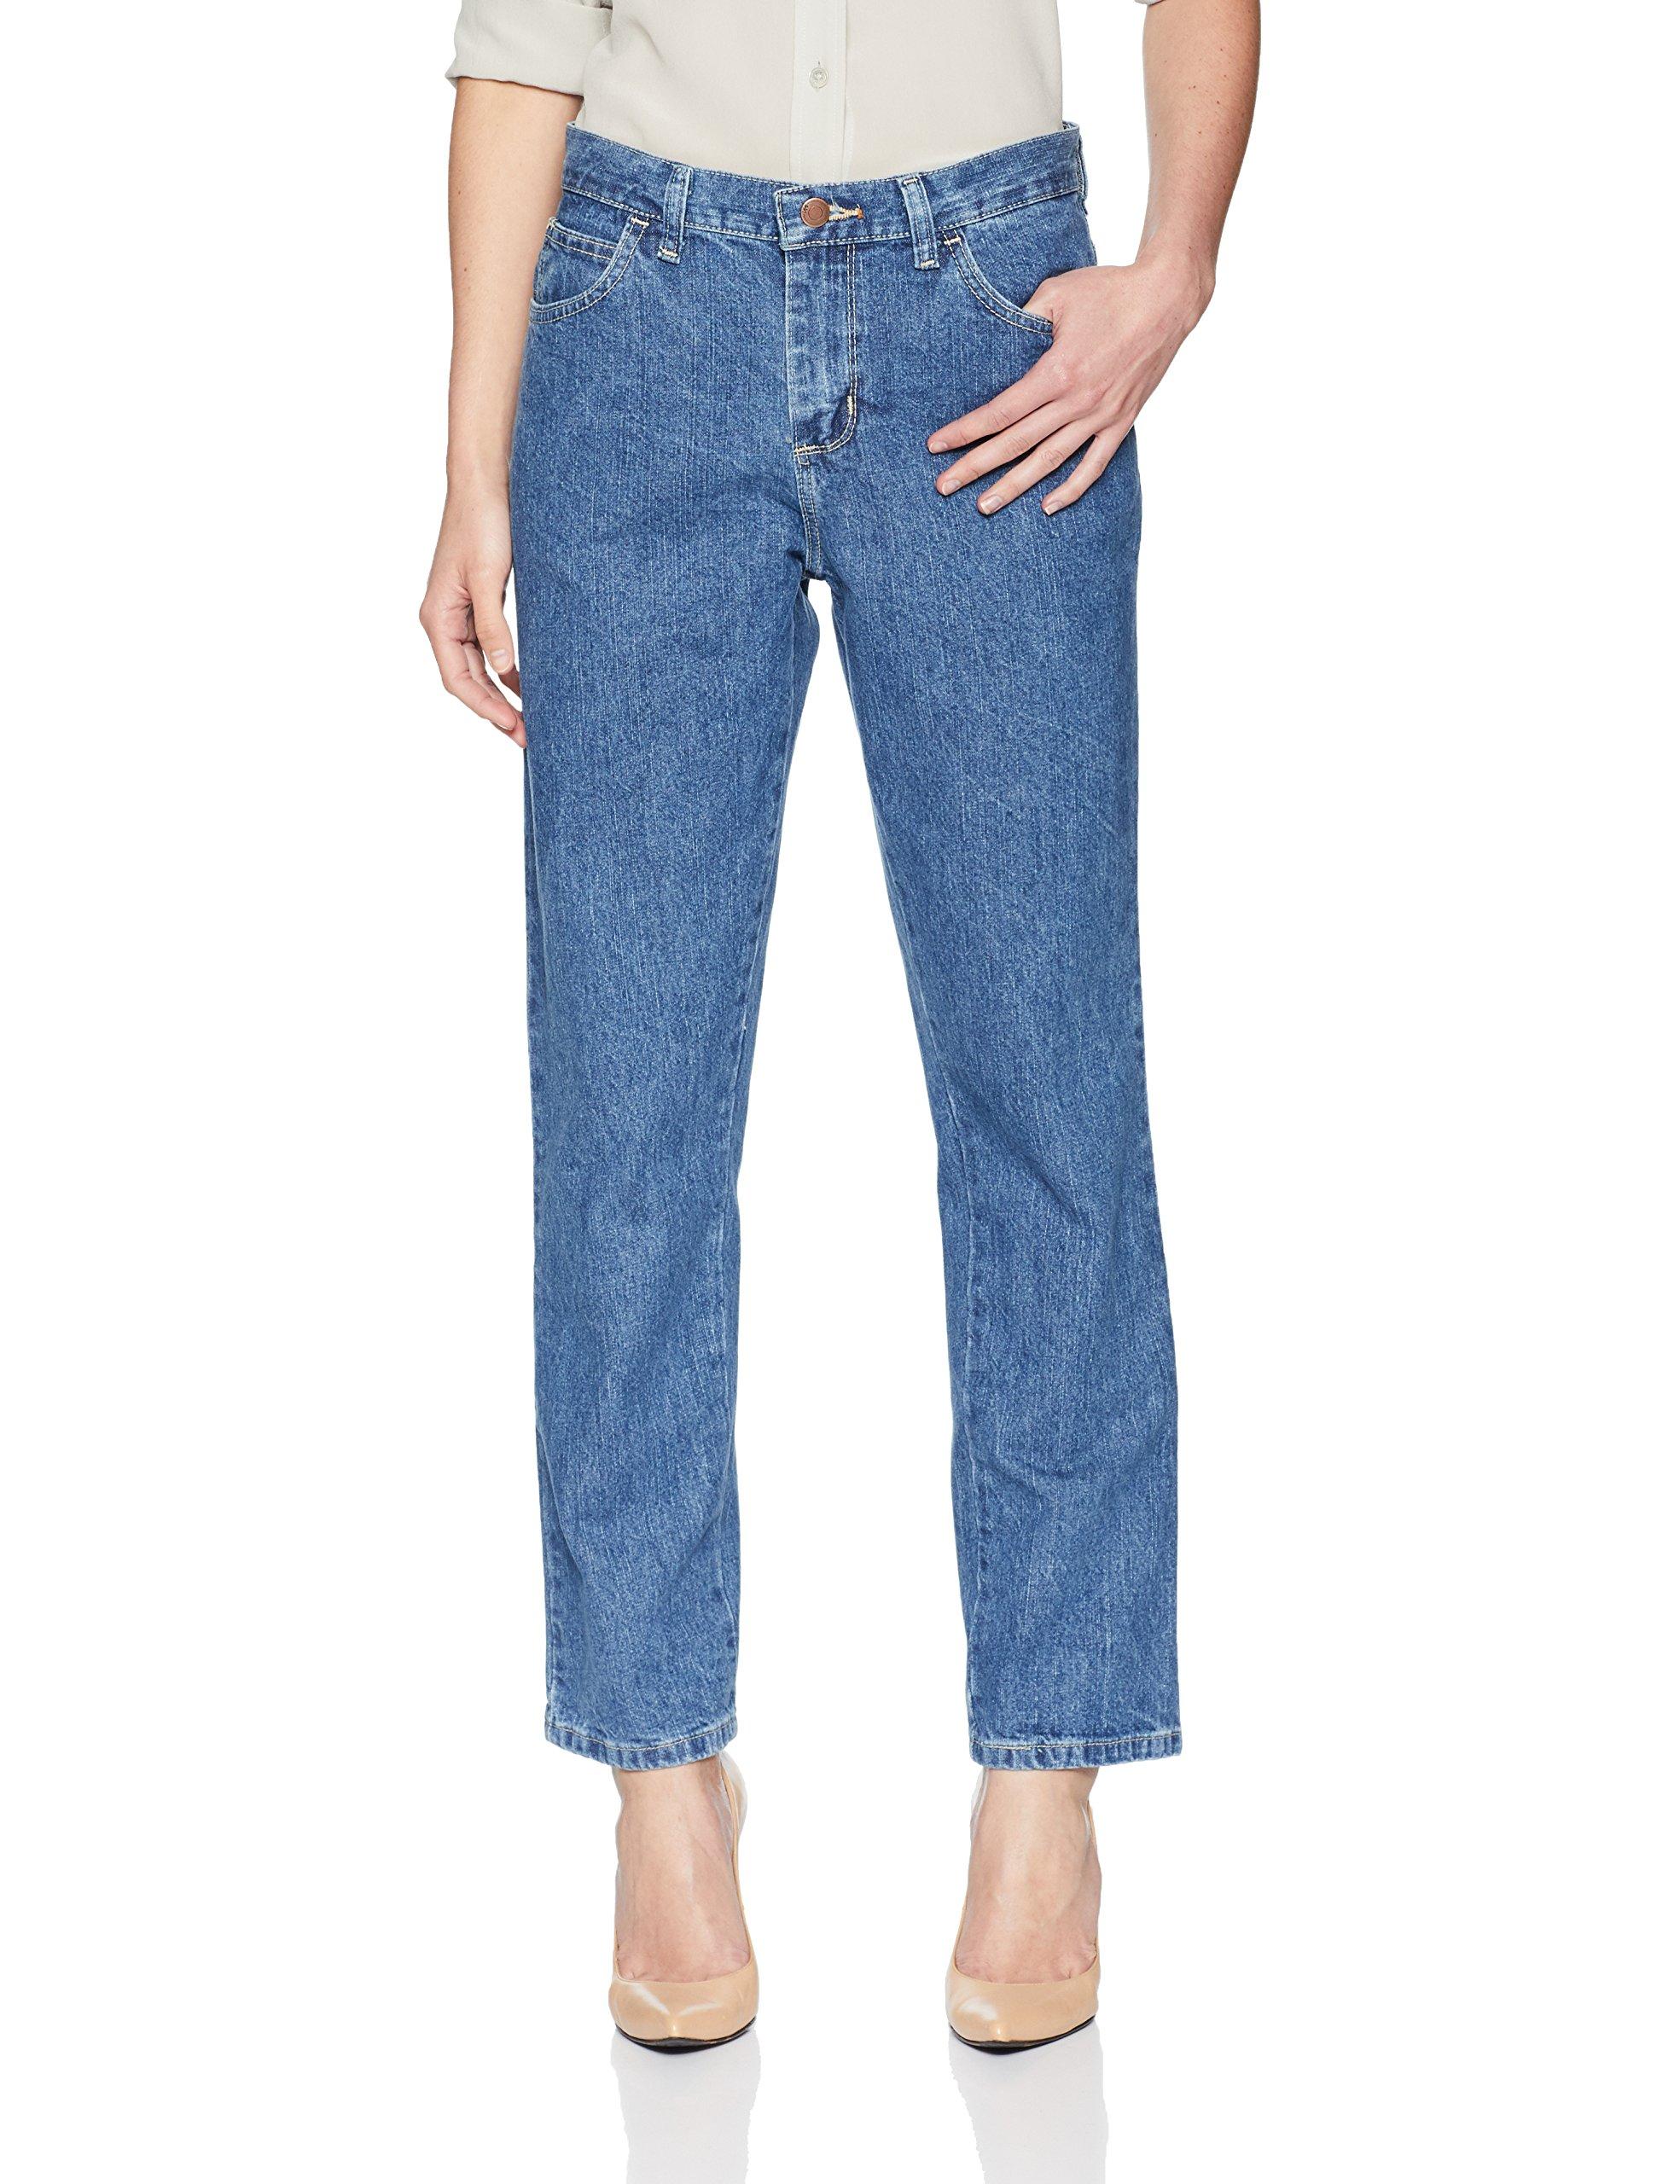 Lee Jeans Relaxed Fit All Cotton Straight Leg Jean in Blue - Lyst